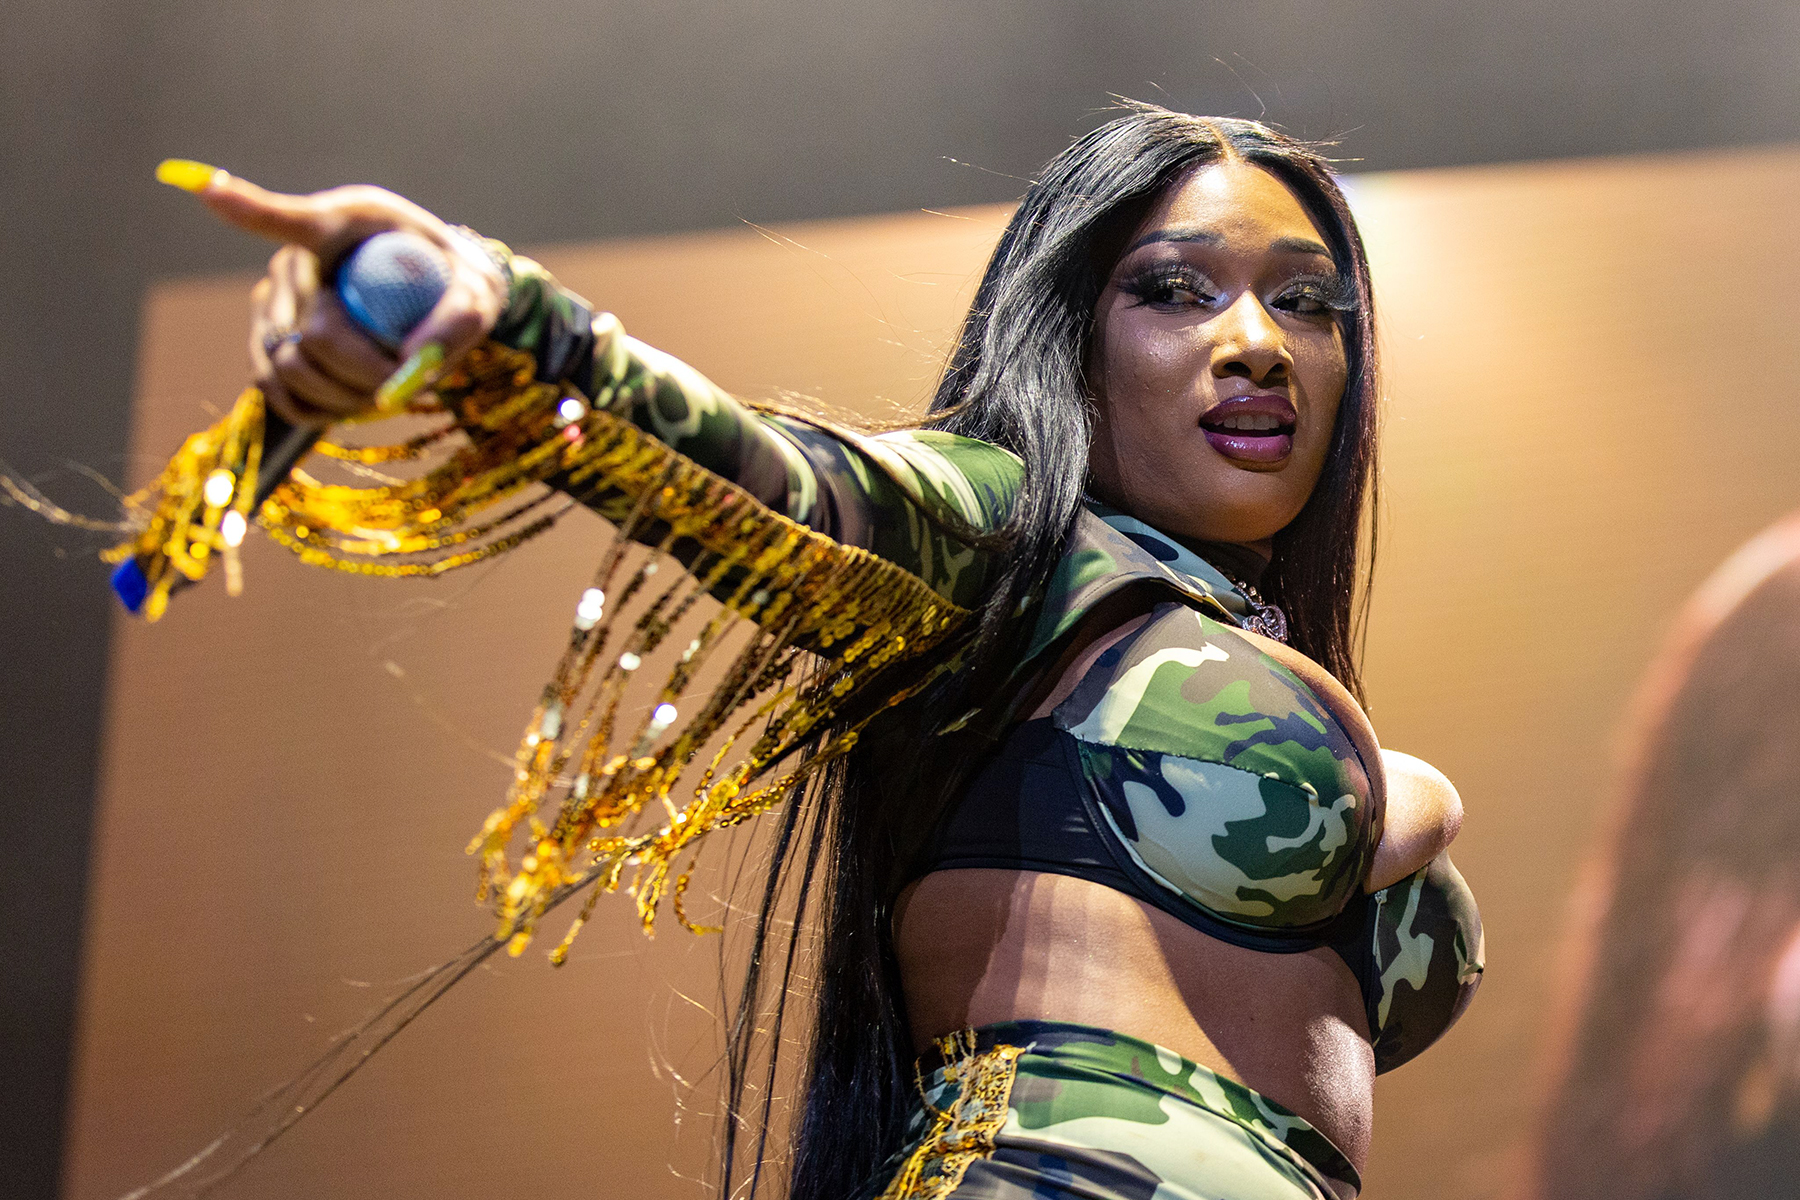 Rapper Megan Thee Stallion sued by camerman claiming he was forced to watch her have s3x